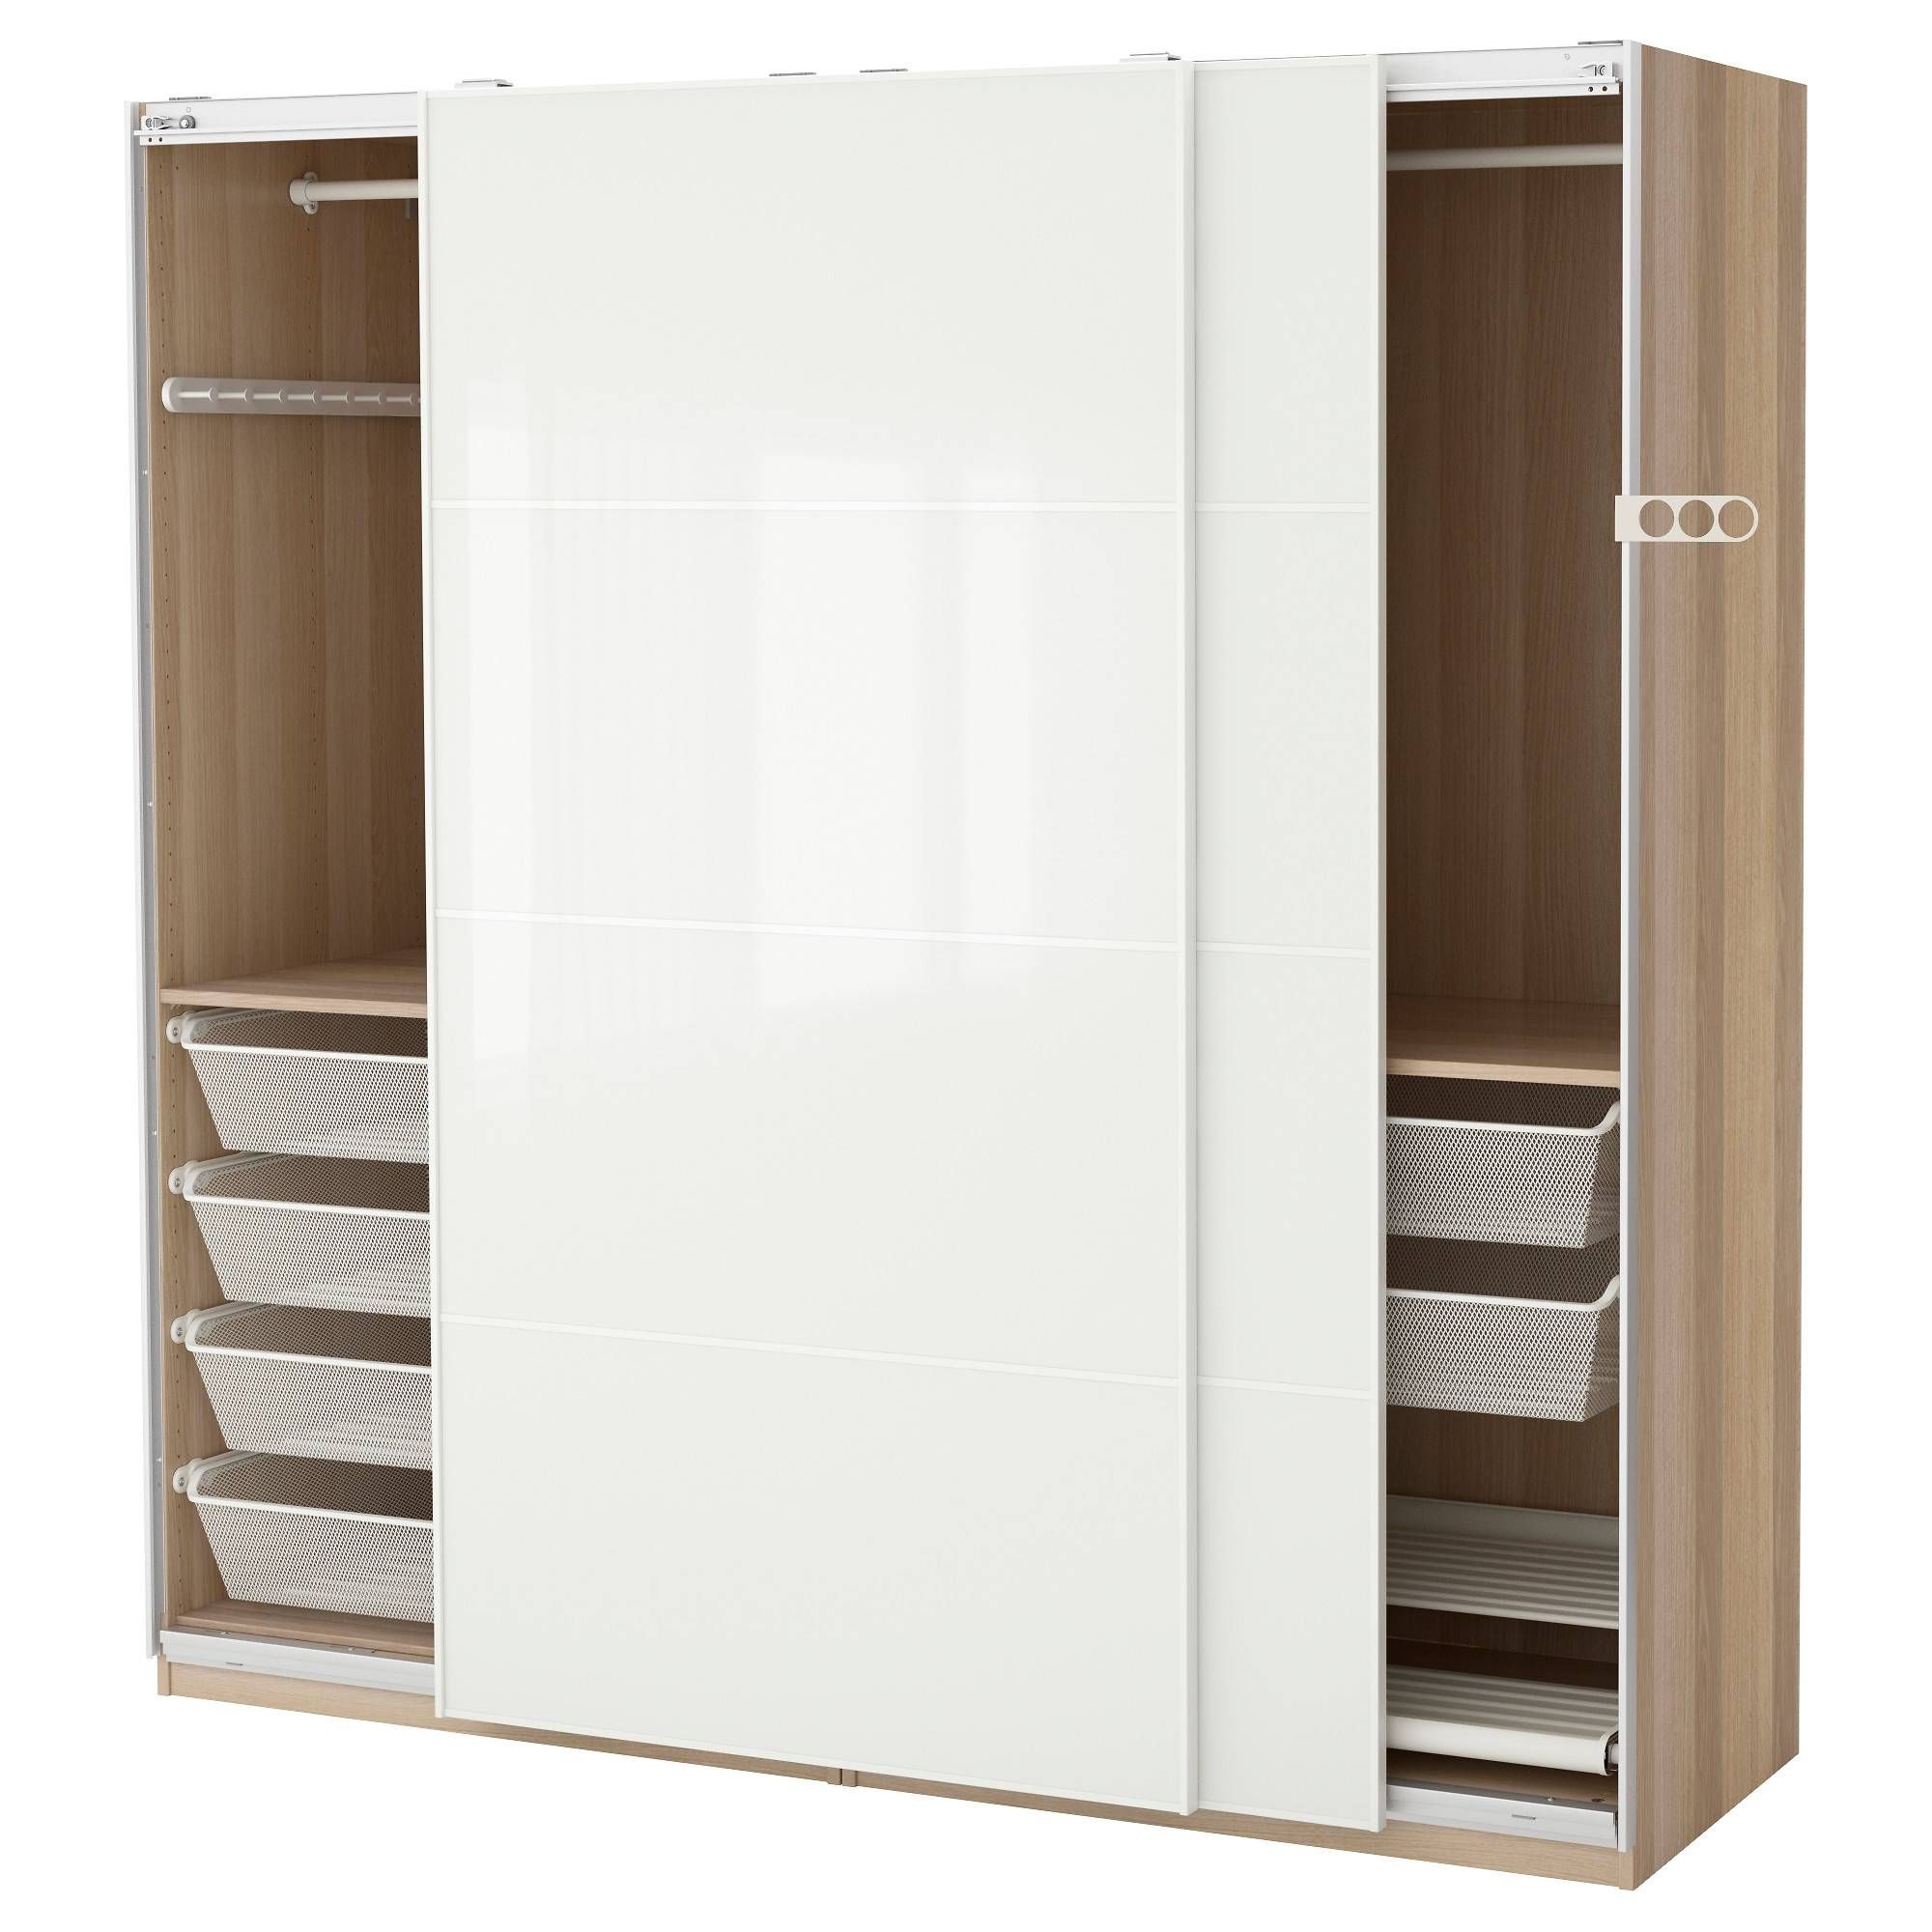 Pax Wardrobe White Stained Oak Effect/färvik White Glass Intended For Double Rail Wardrobes Ikea (Photo 12 of 30)